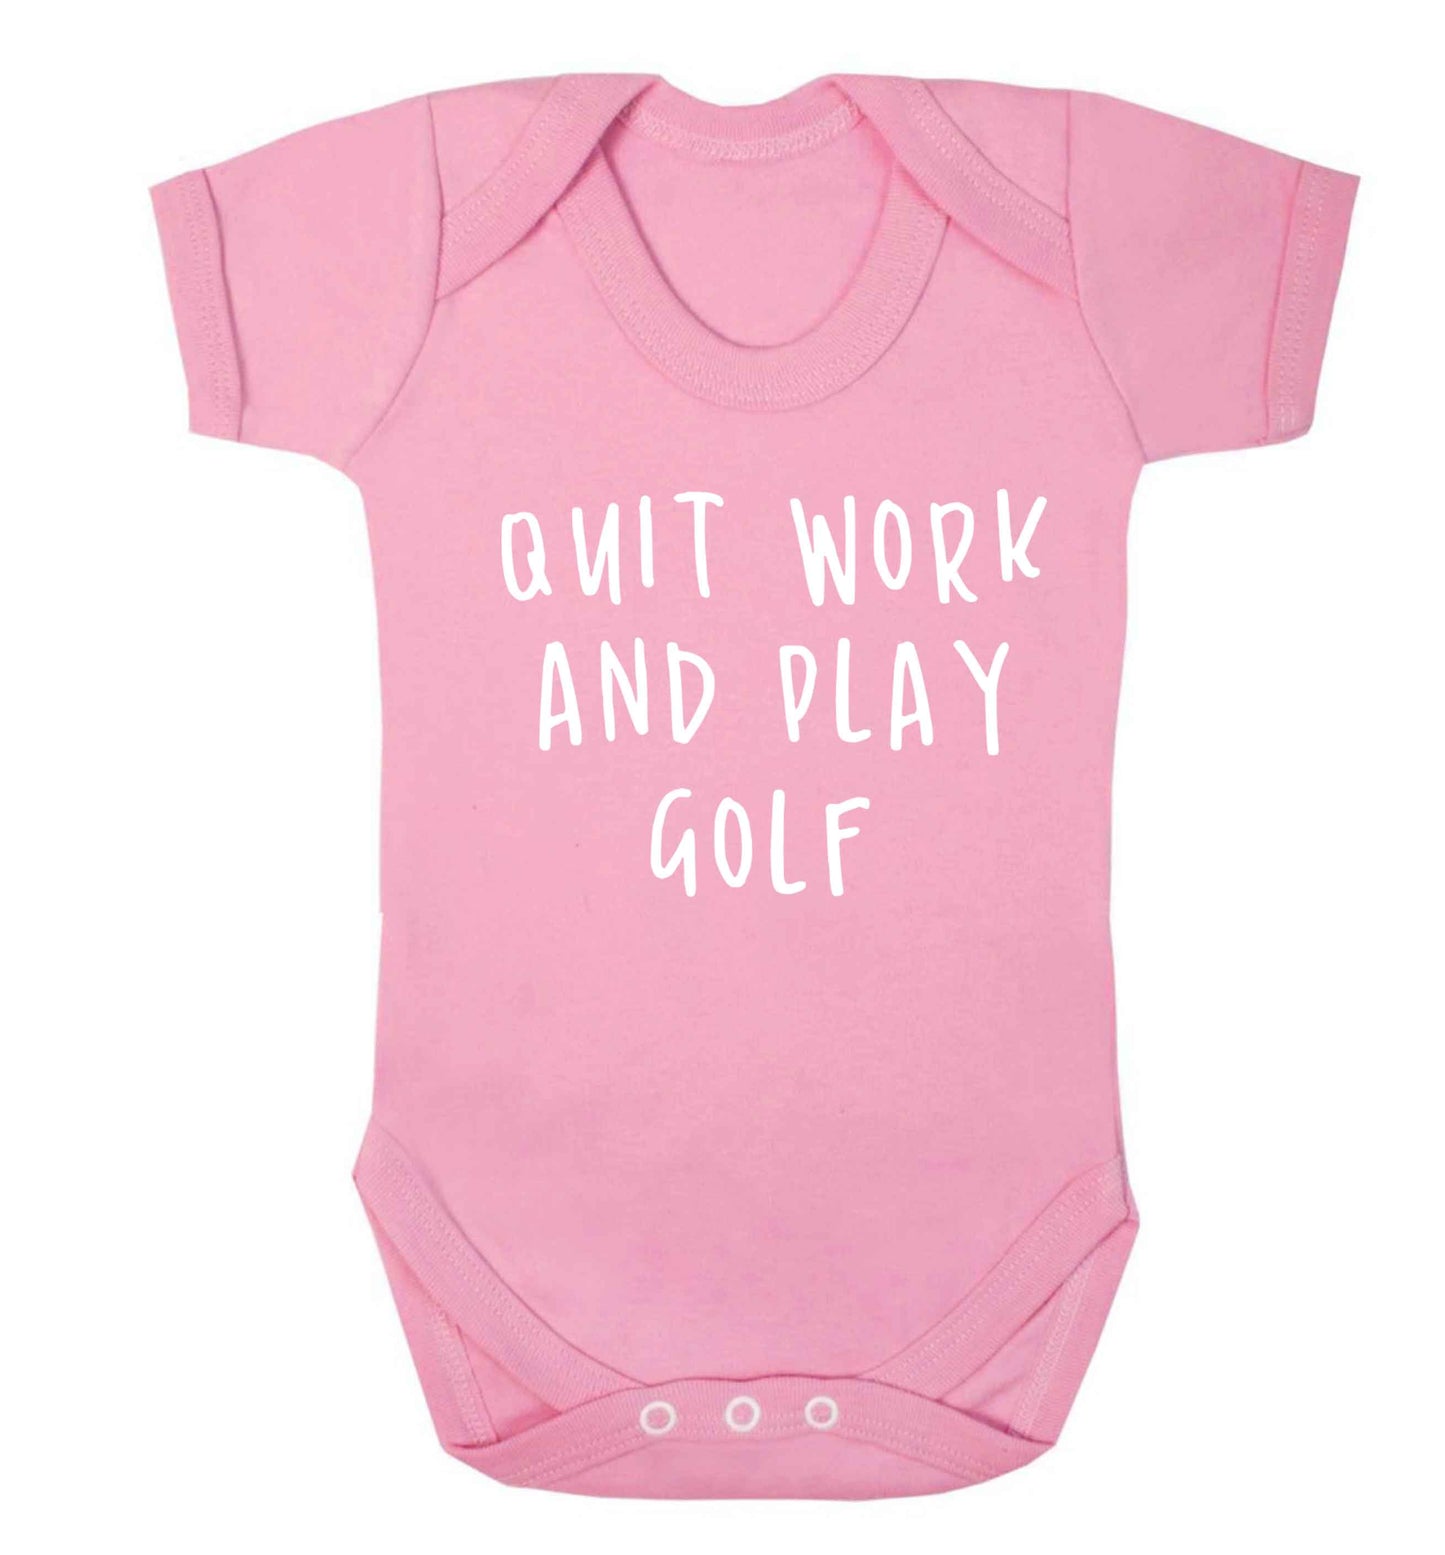 Quit work and play golf Baby Vest pale pink 18-24 months